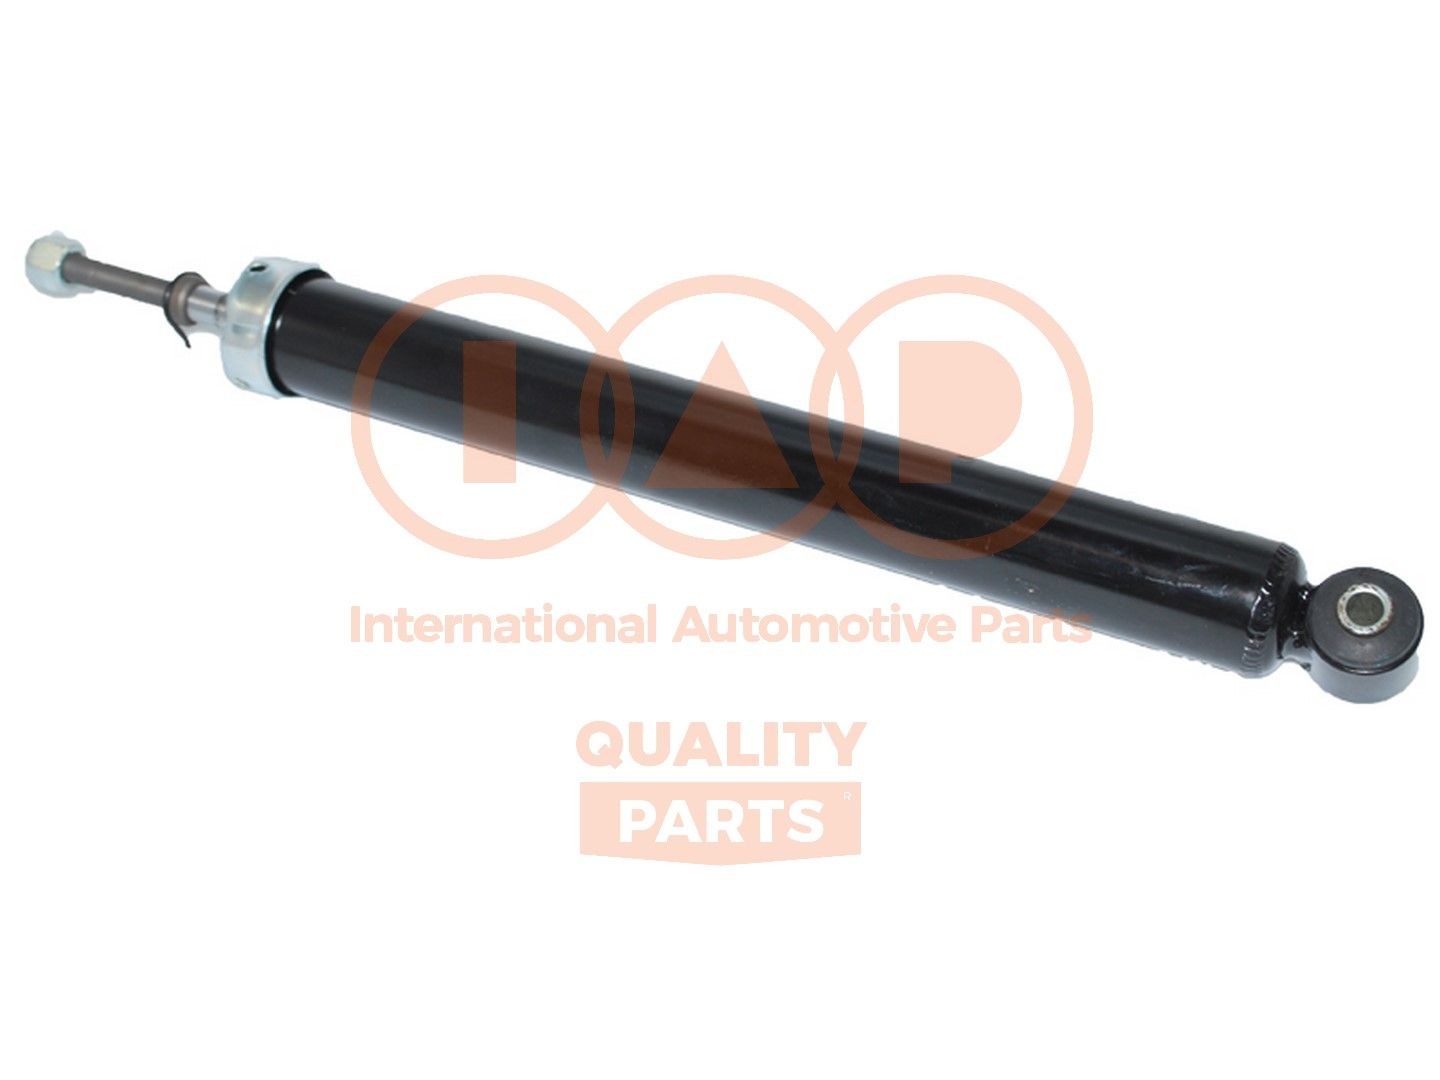 IAP QUALITY PARTS 504-17109 Shock absorber 48530-0D310